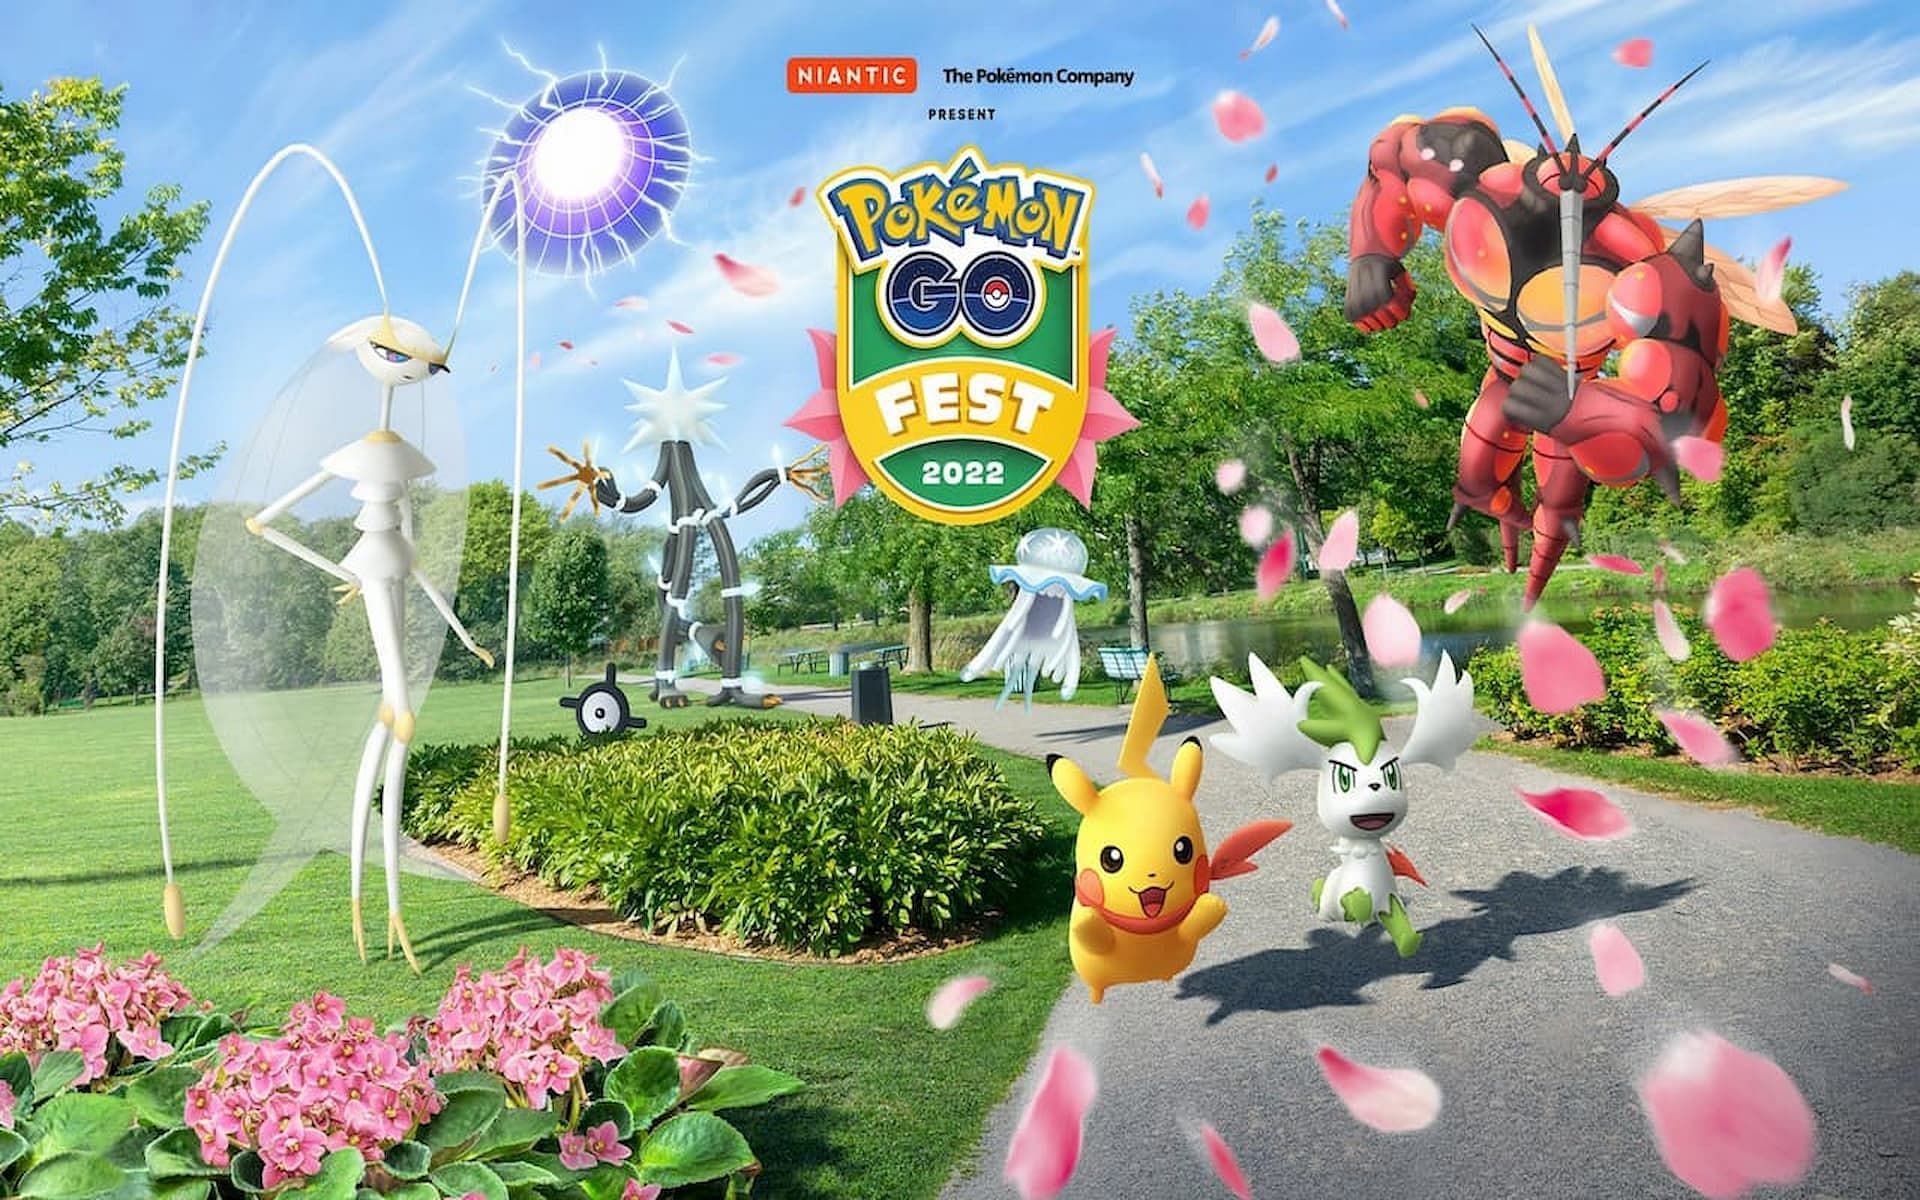 The final Pokemon GO Fest event for 2022 is taking place (Image via Niantic)